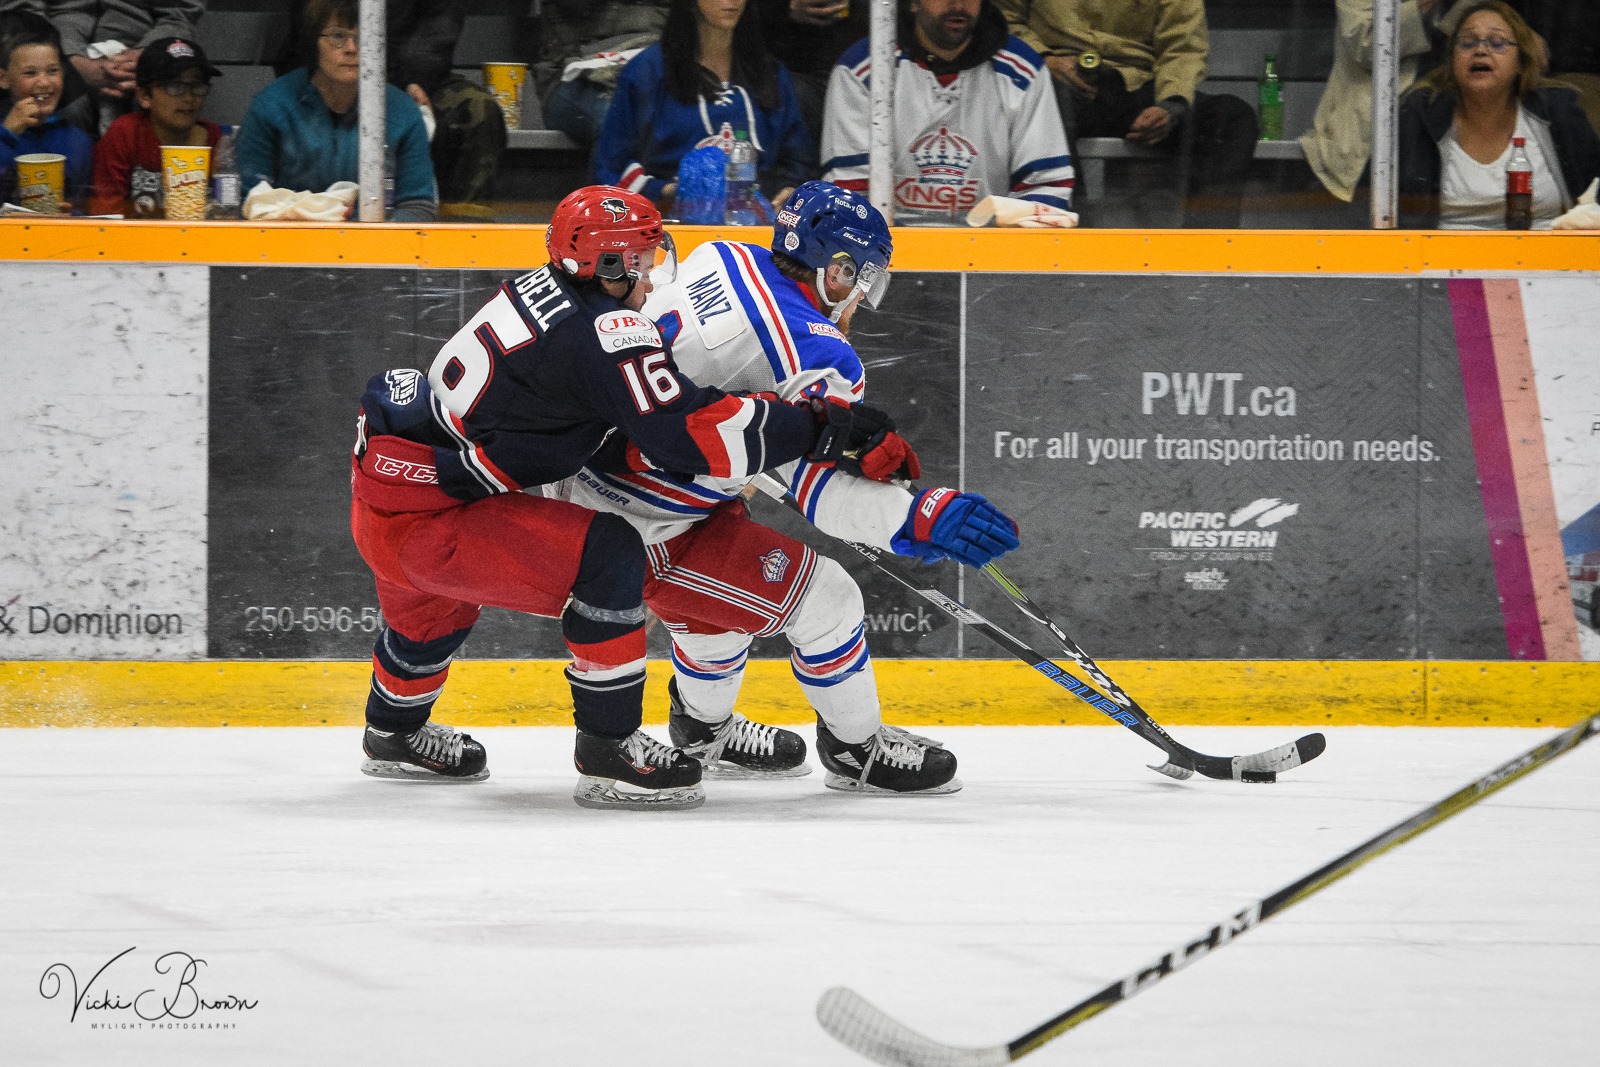 Bandits cut down Spruce Kings in national final - Prince George Citizen